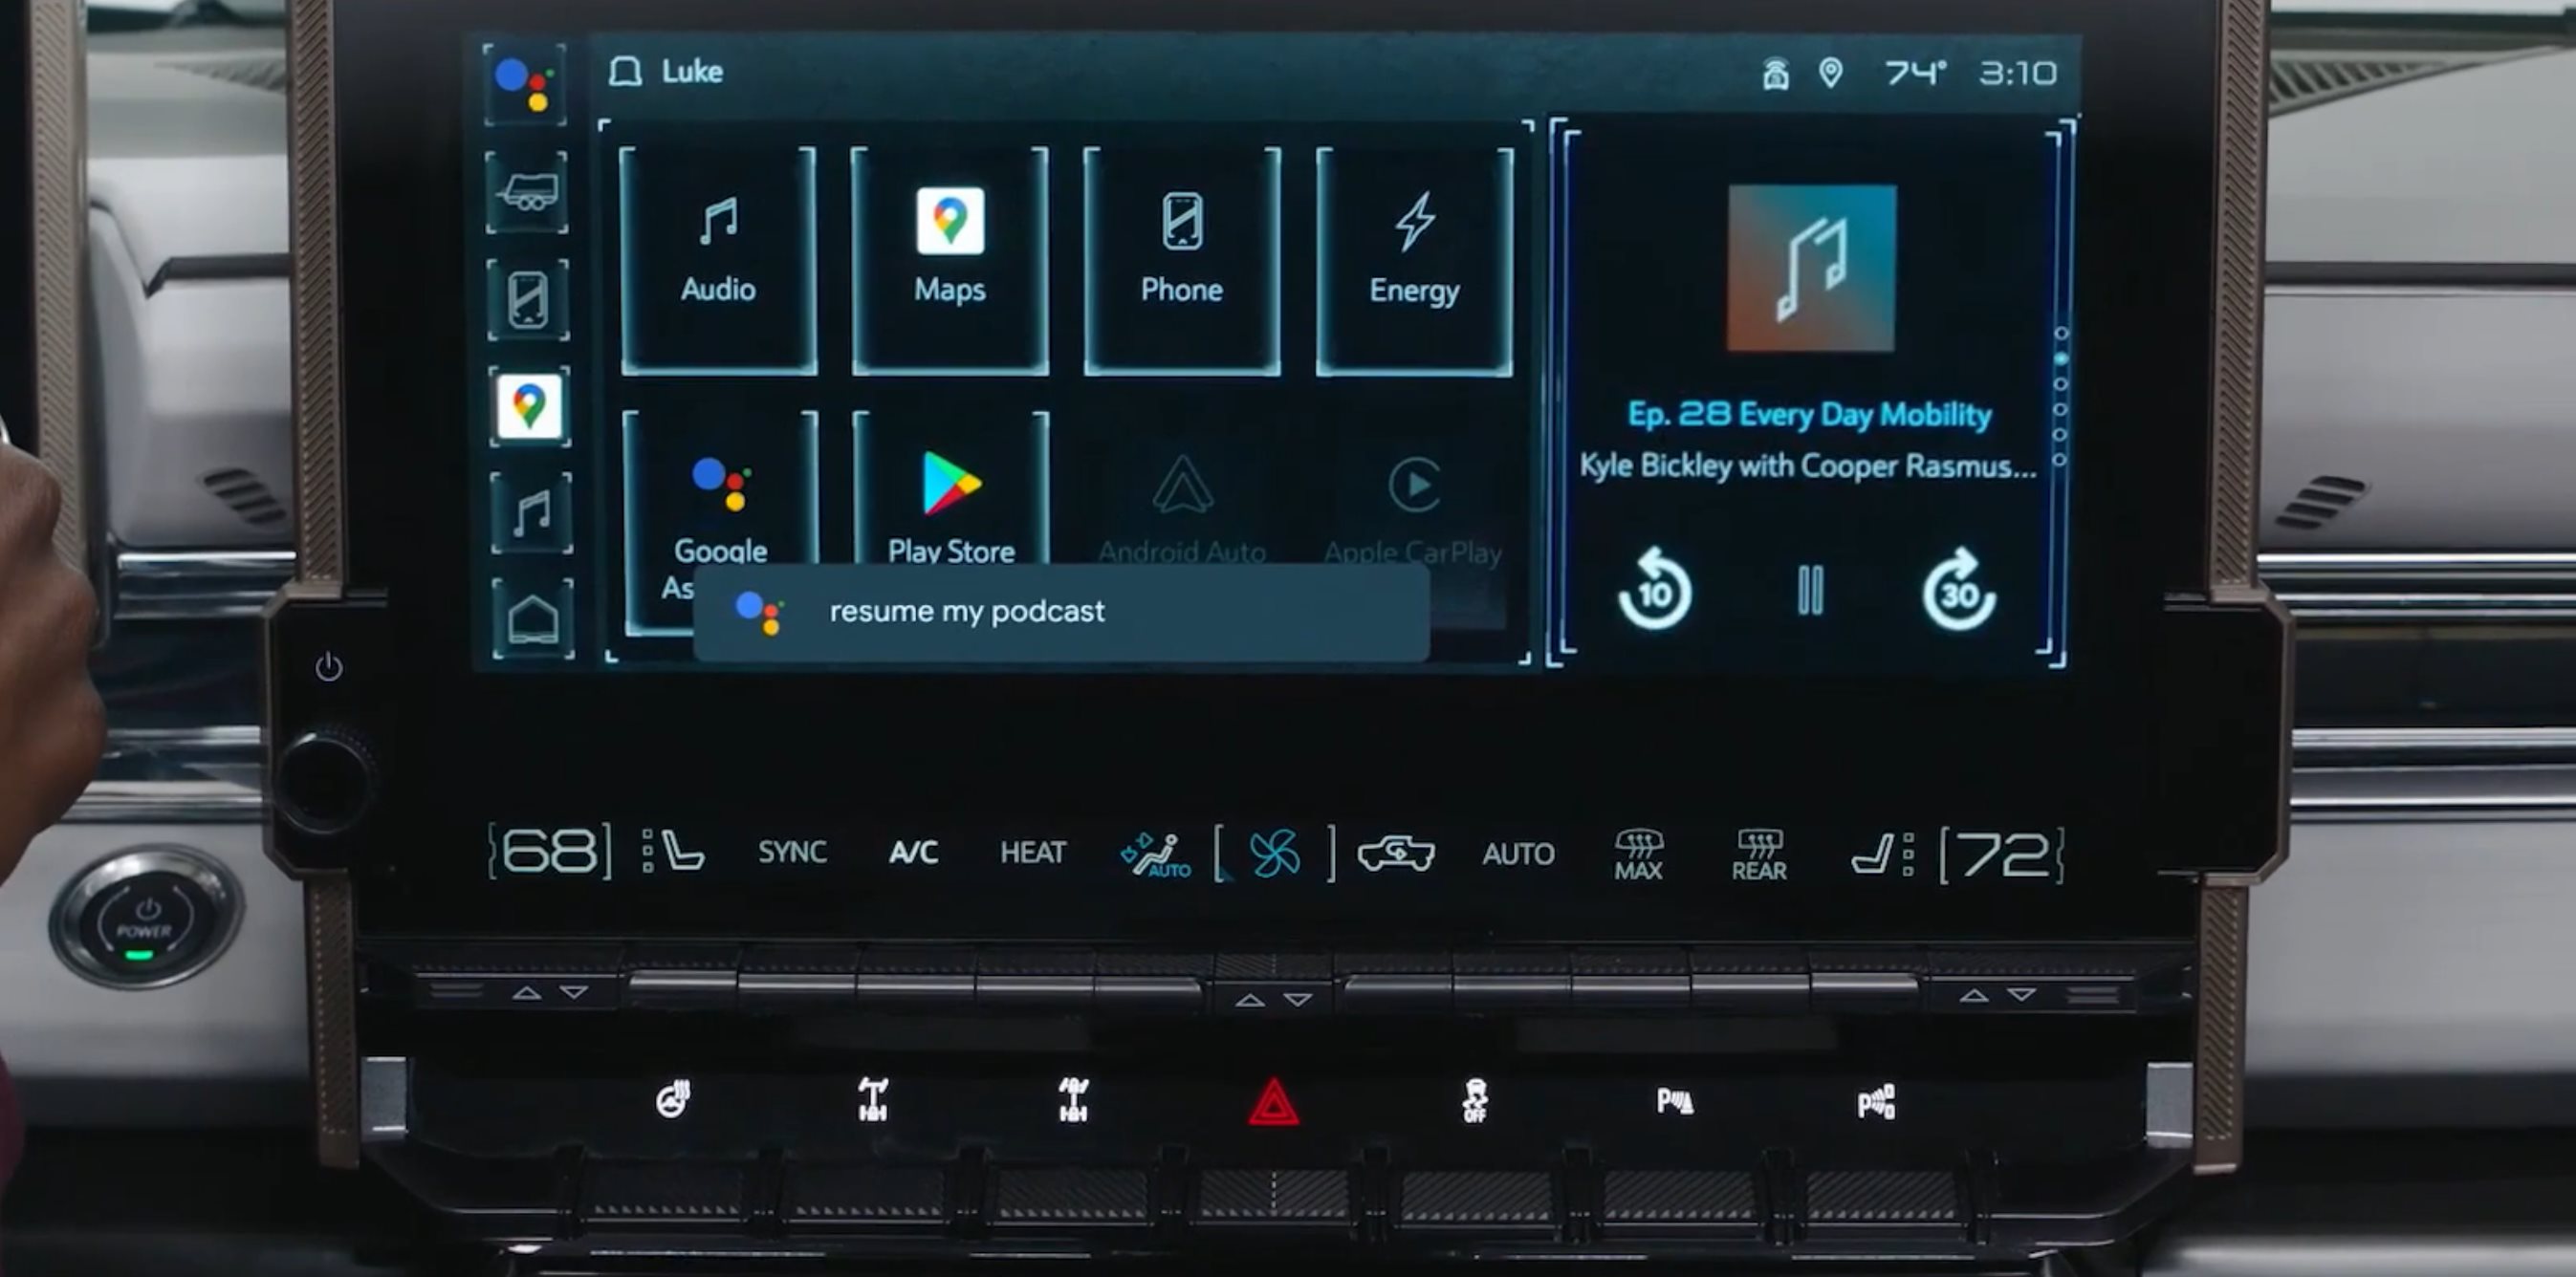 This Concept Envisions the Next-Generation Android Auto - autoevolution